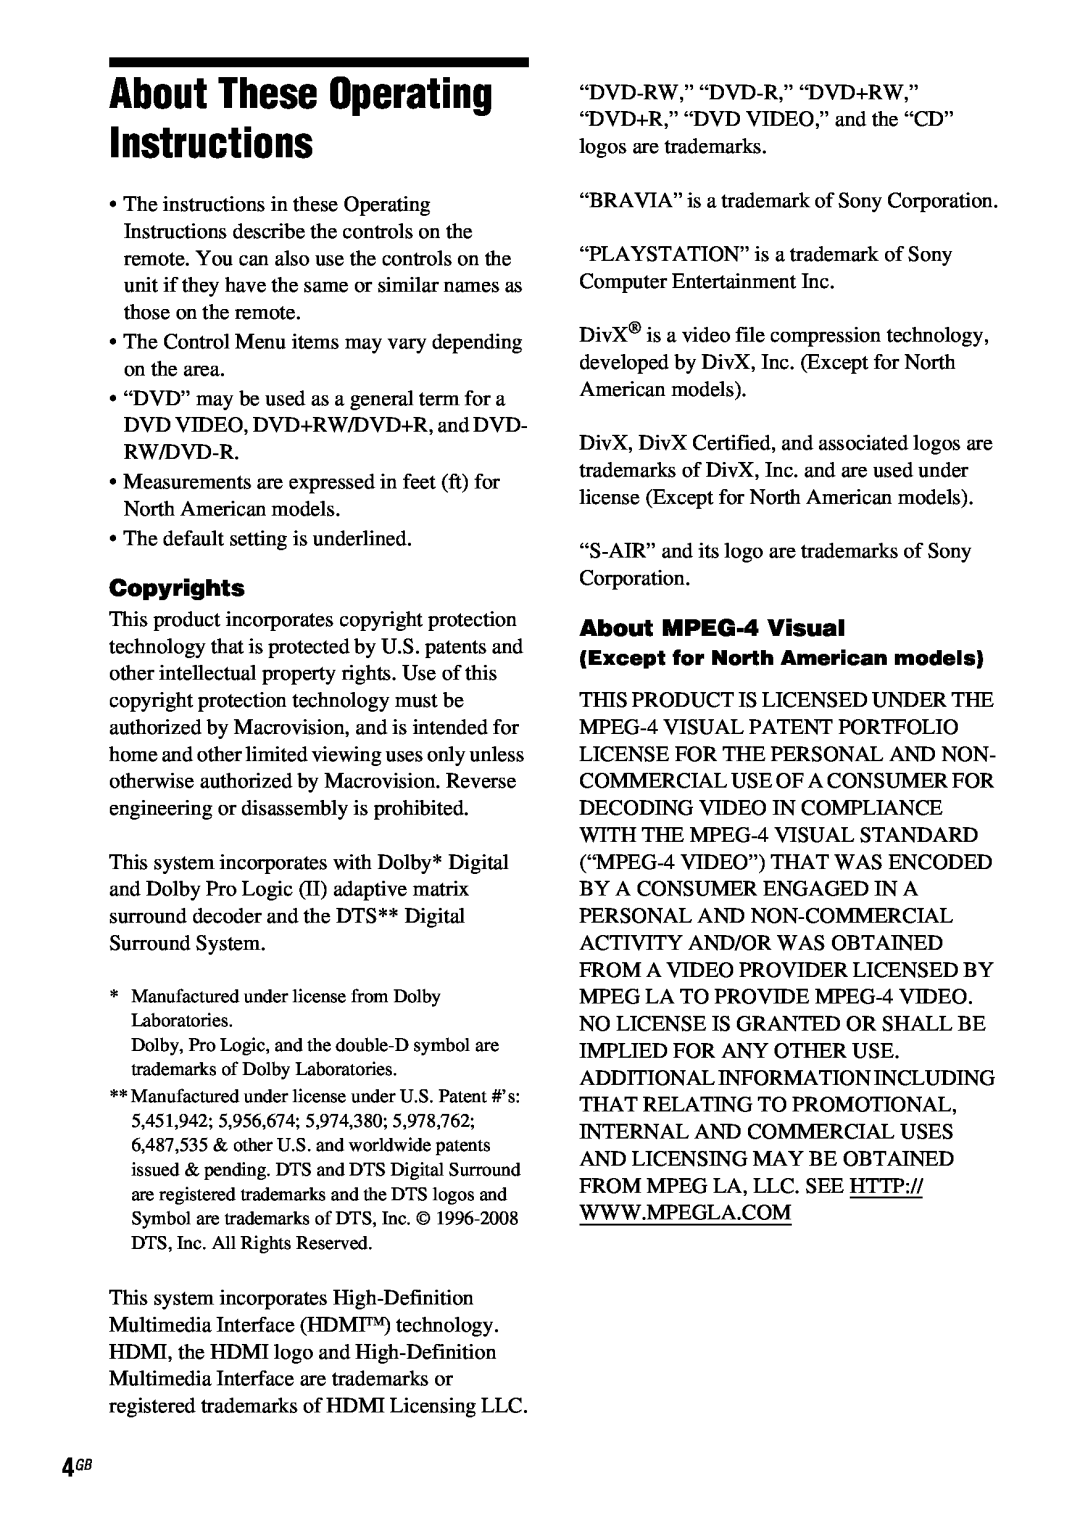 Sony DAV-HDX685 manual About These Operating Instructions, Copyrights, About MPEG-4Visual, Except for North American models 